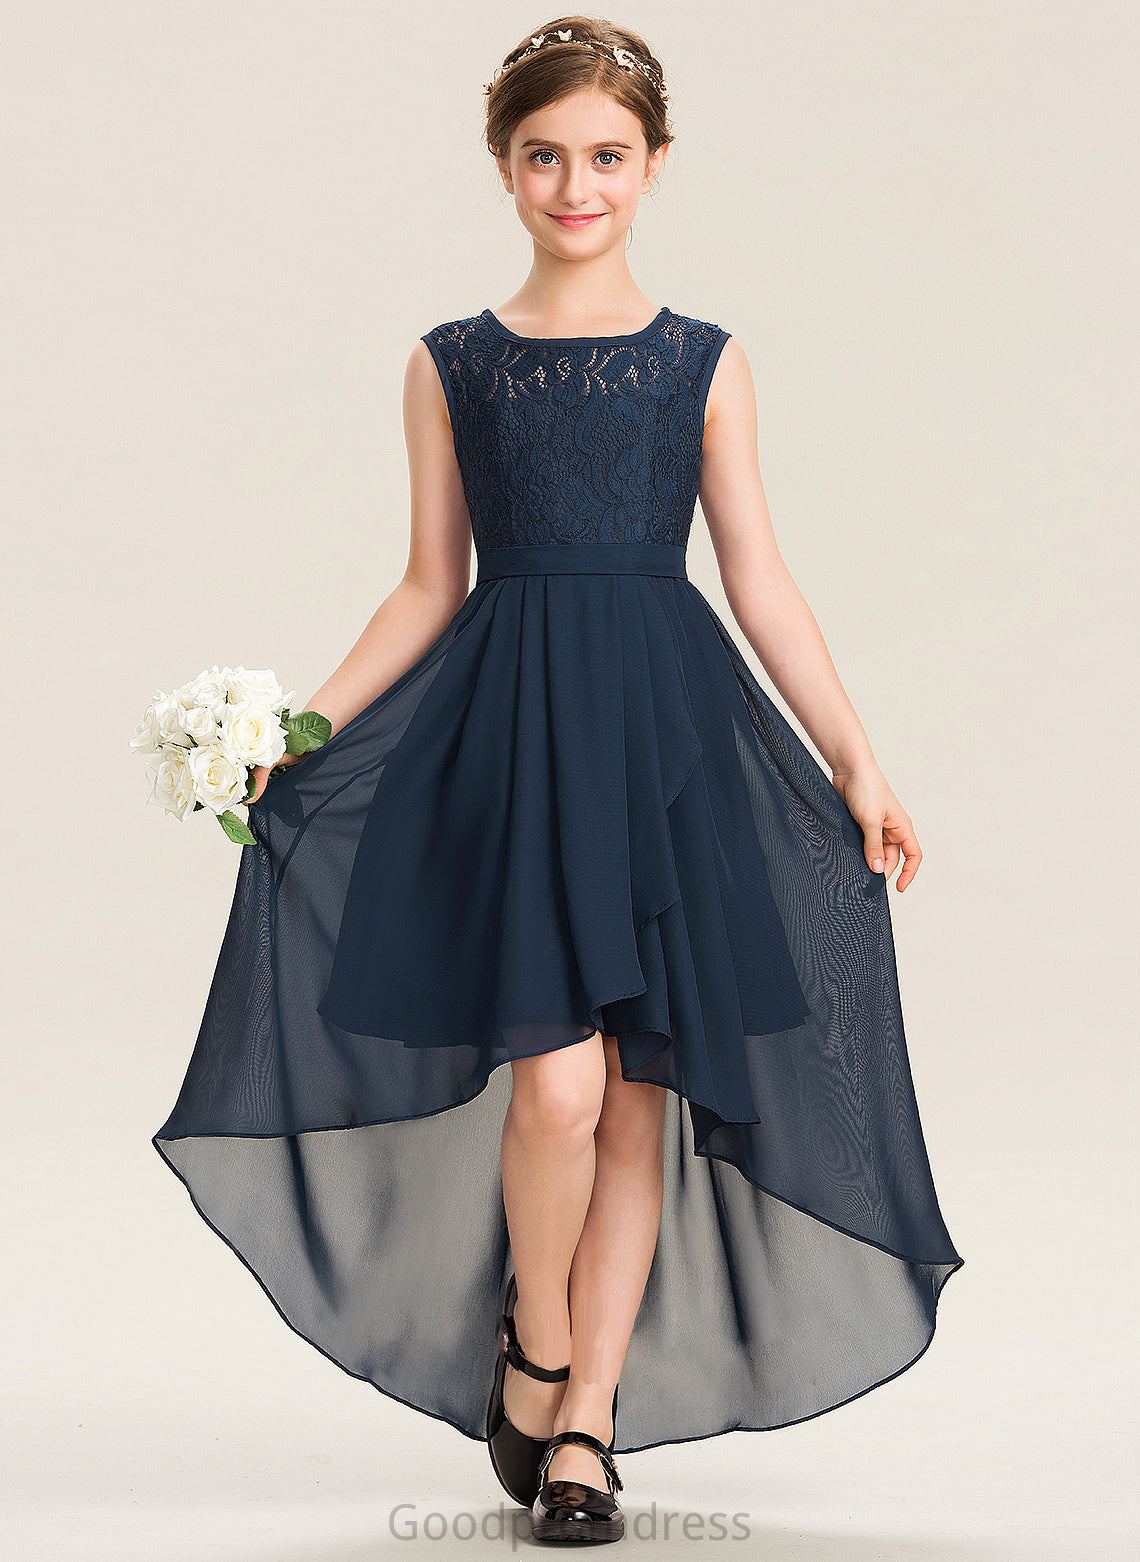 Lace Scoop Neck With Ruffles Cascading Asymmetrical Junior Bridesmaid Dresses Chiffon A-Line Bow(s) Amirah